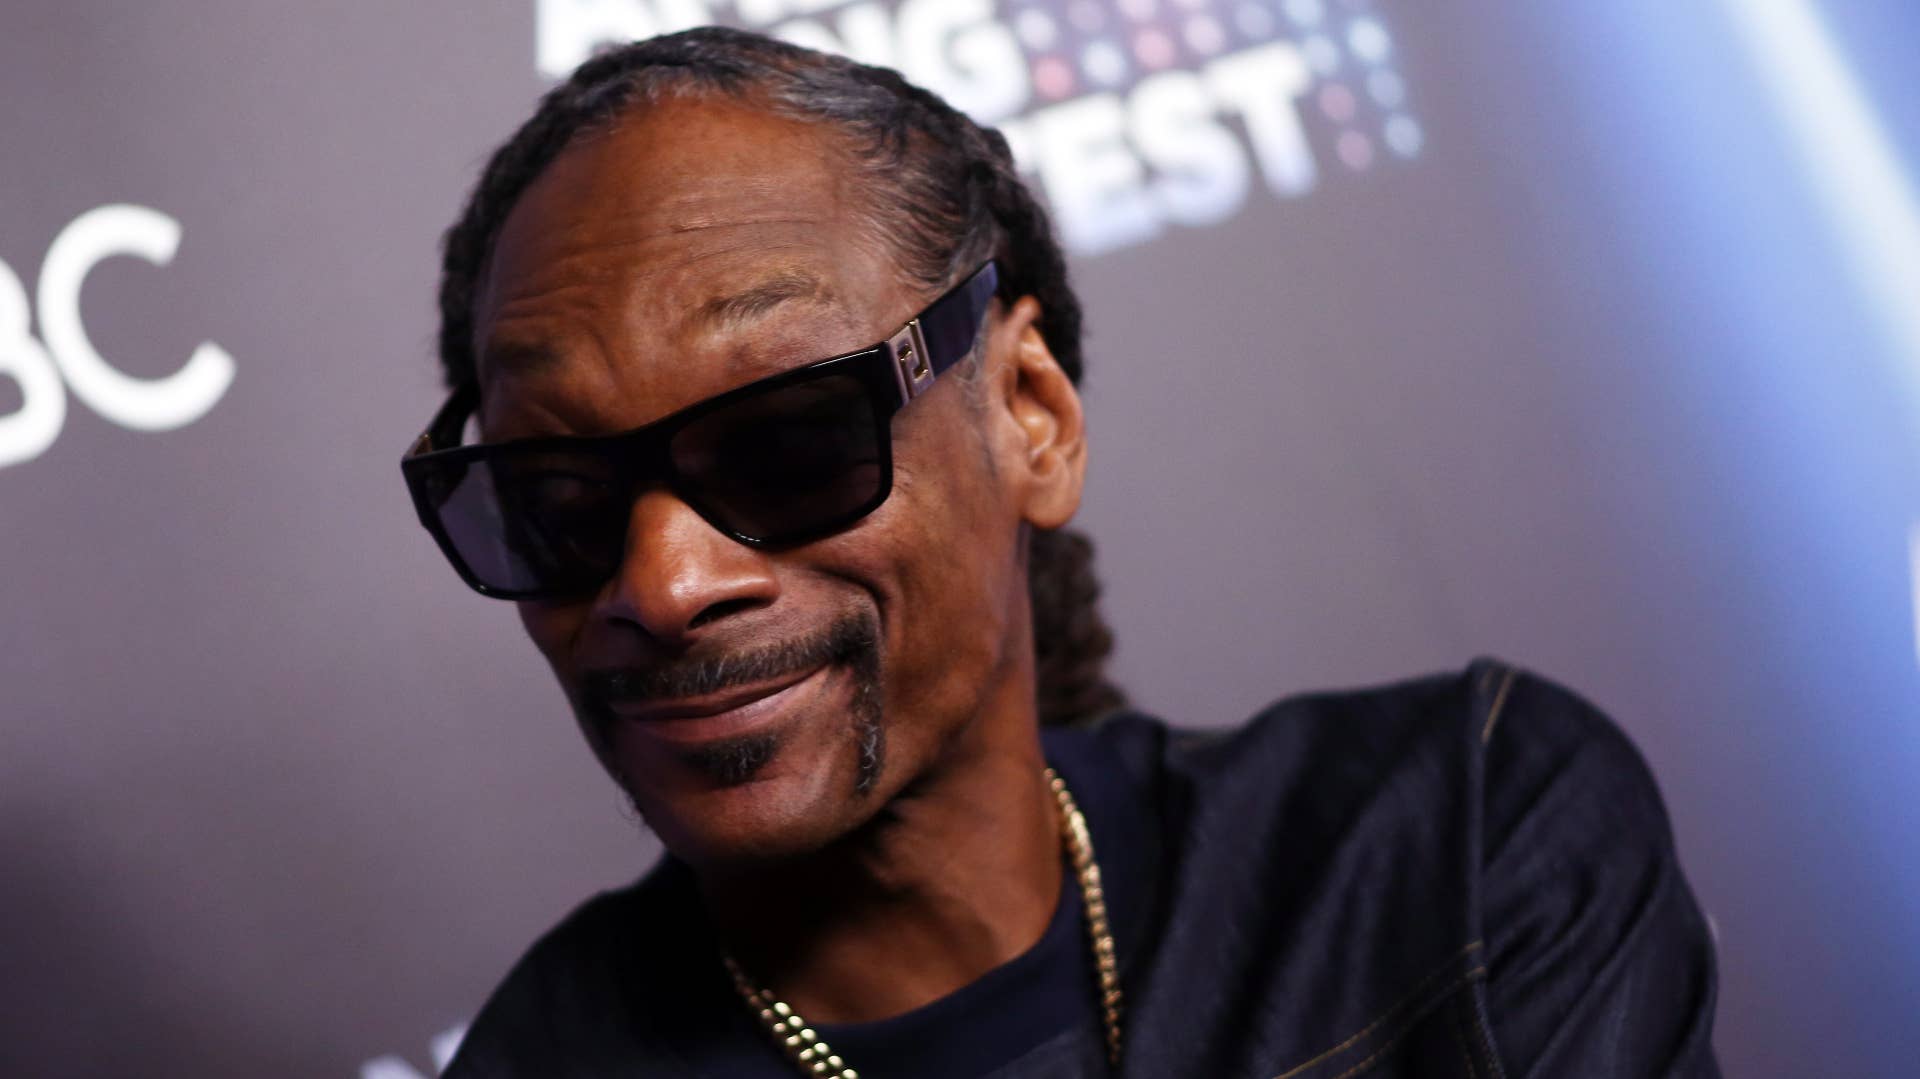 Snoop Dogg photographed on red carpet.